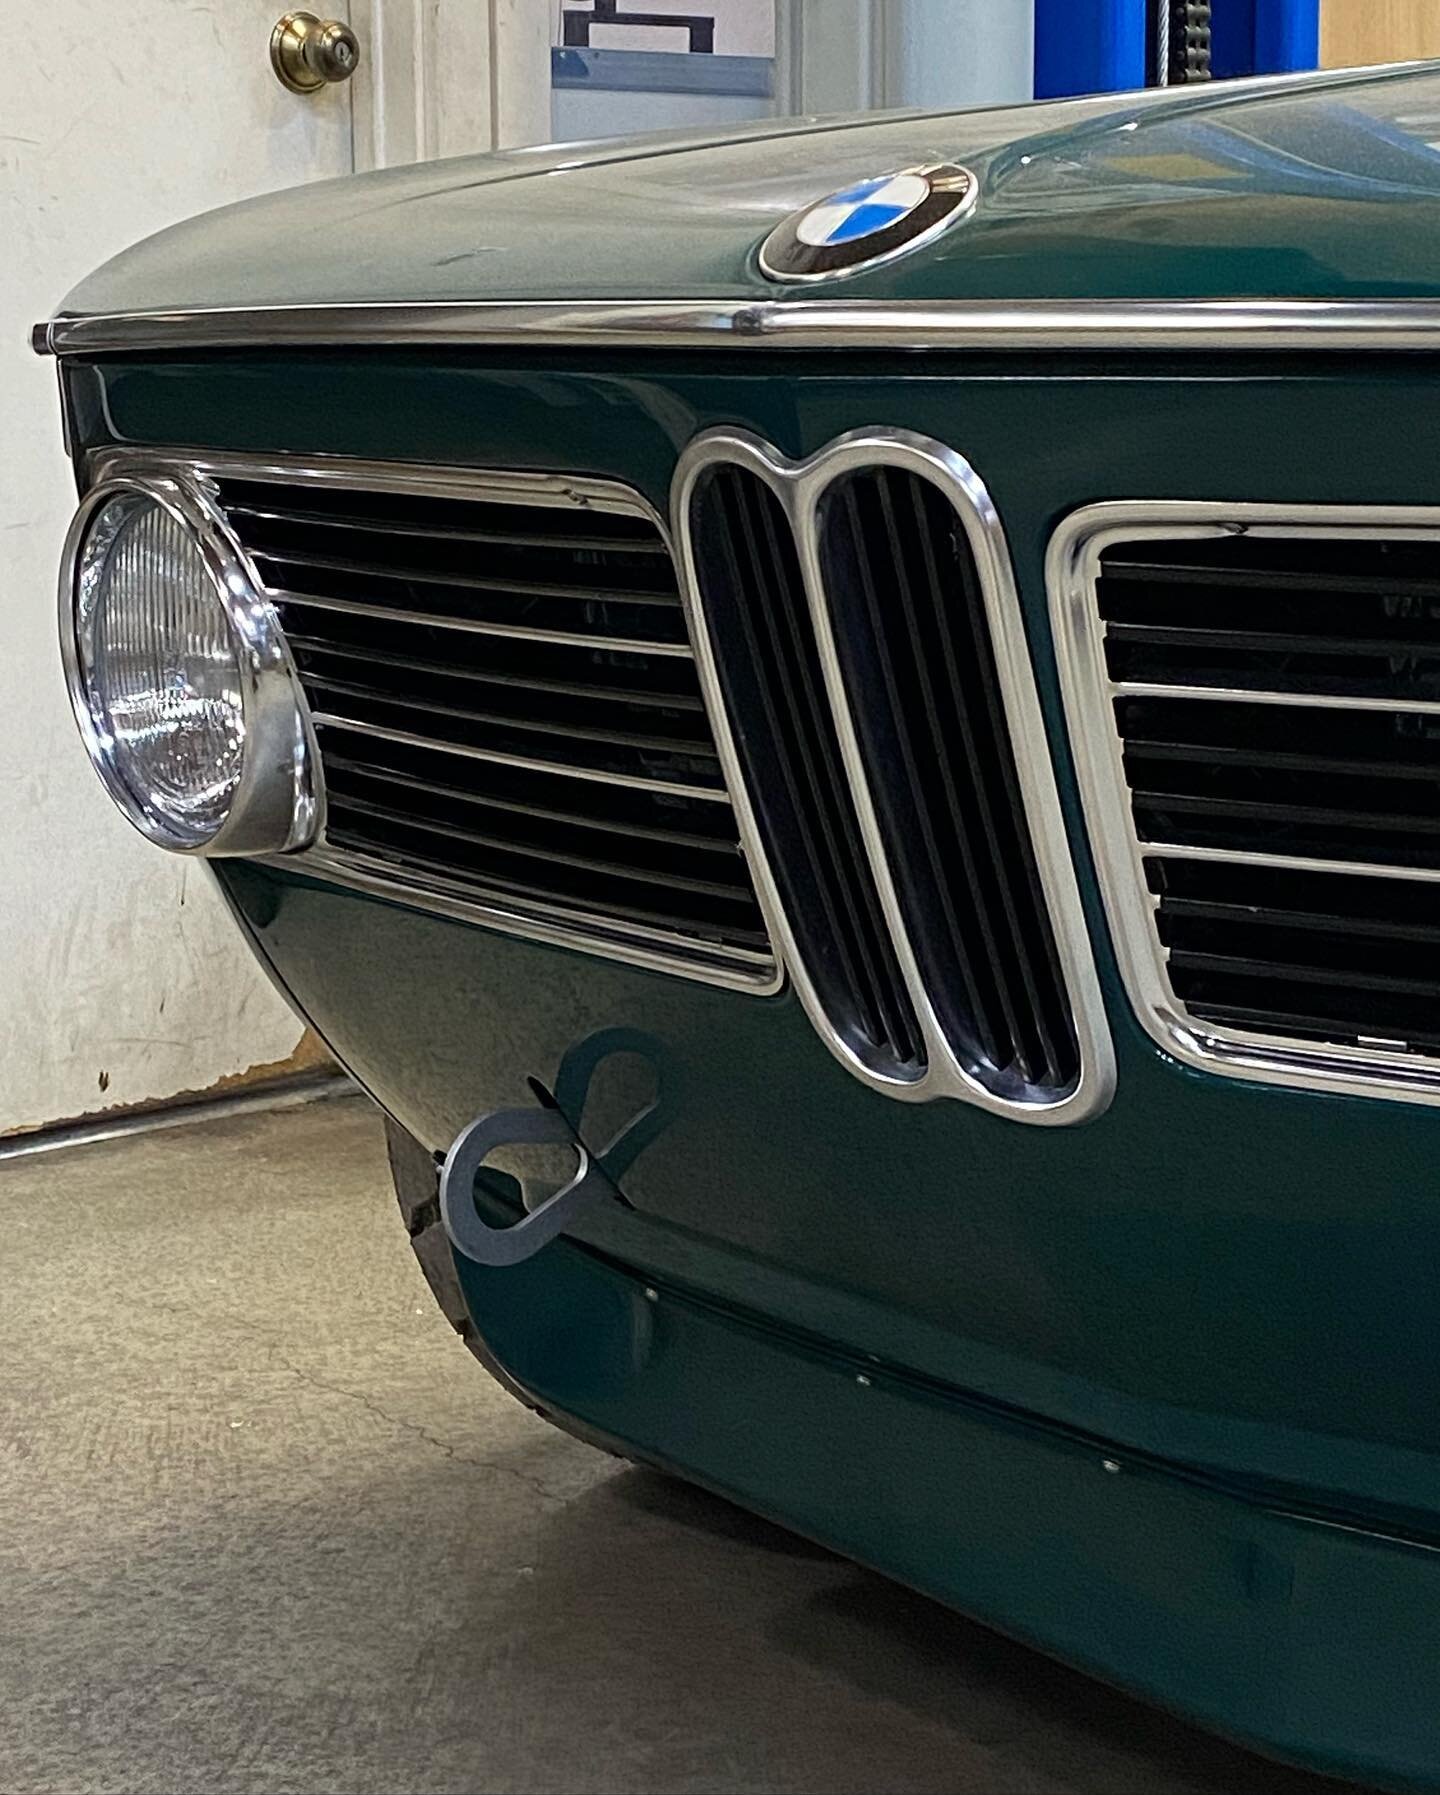 We&rsquo;ve got our hands on the grills!&hellip;&amp; this is what they actually look like. High quality reproduction BMW 2002 early aluminum grill sets are finally available&hellip;&amp; we&rsquo;ll be making a review/ installation video..&amp; ship